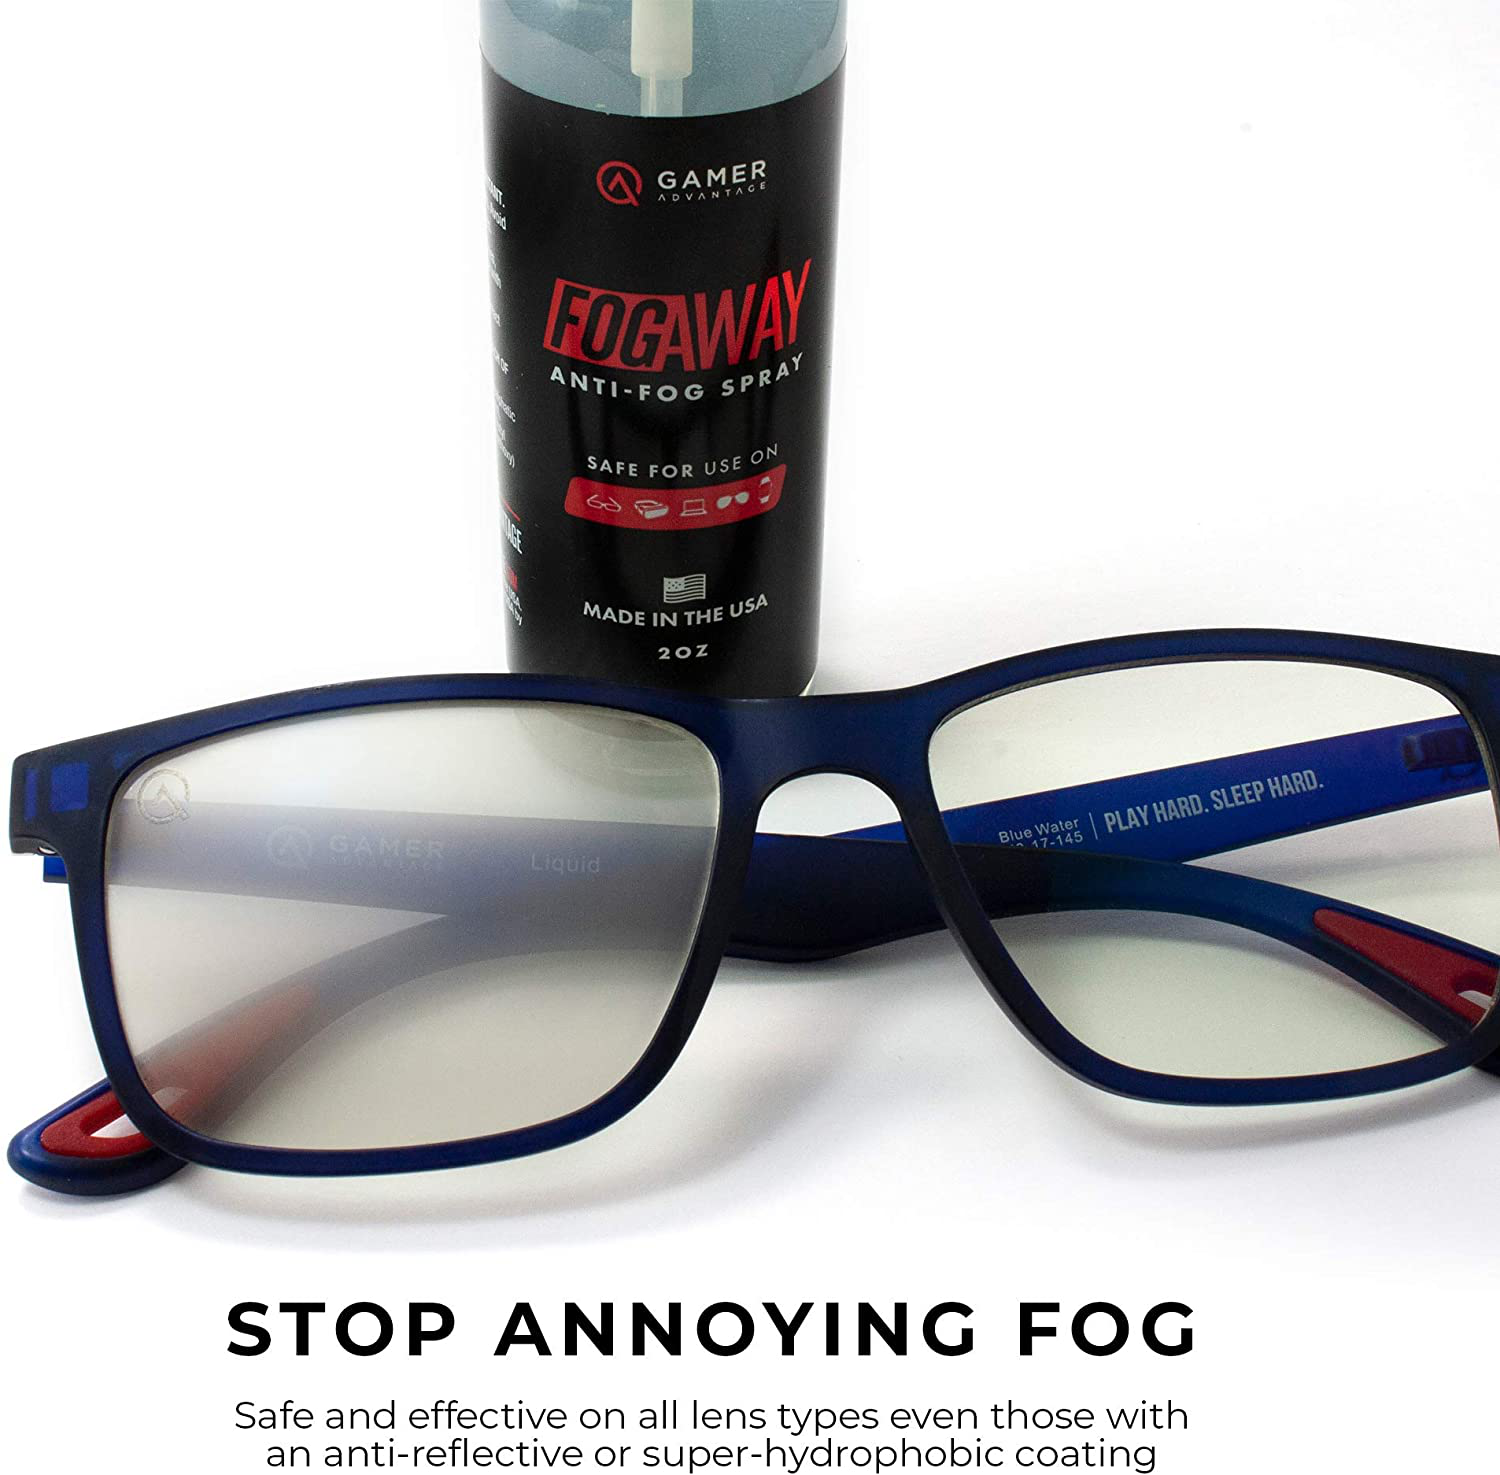 Anti Fog Spray for Glasses | Prevents Fog on All Lenses and Devices such as: Glasses, Goggles, PPE, VR Headsets | Safe on Anti-Reflective Lenses | Made in the USA | FogAway by Gamer Advantage